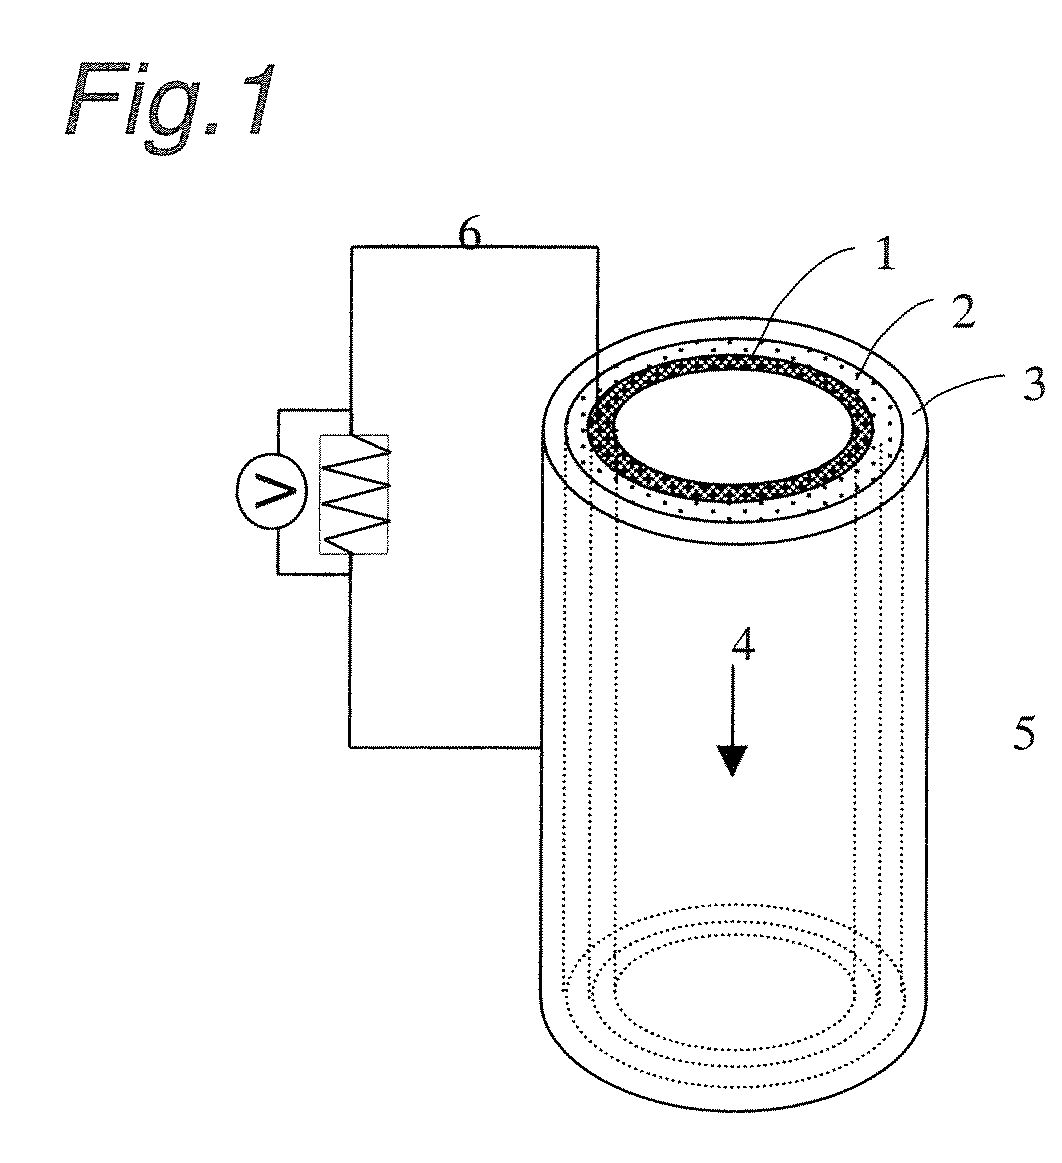 Method and apparatus of generating electric power